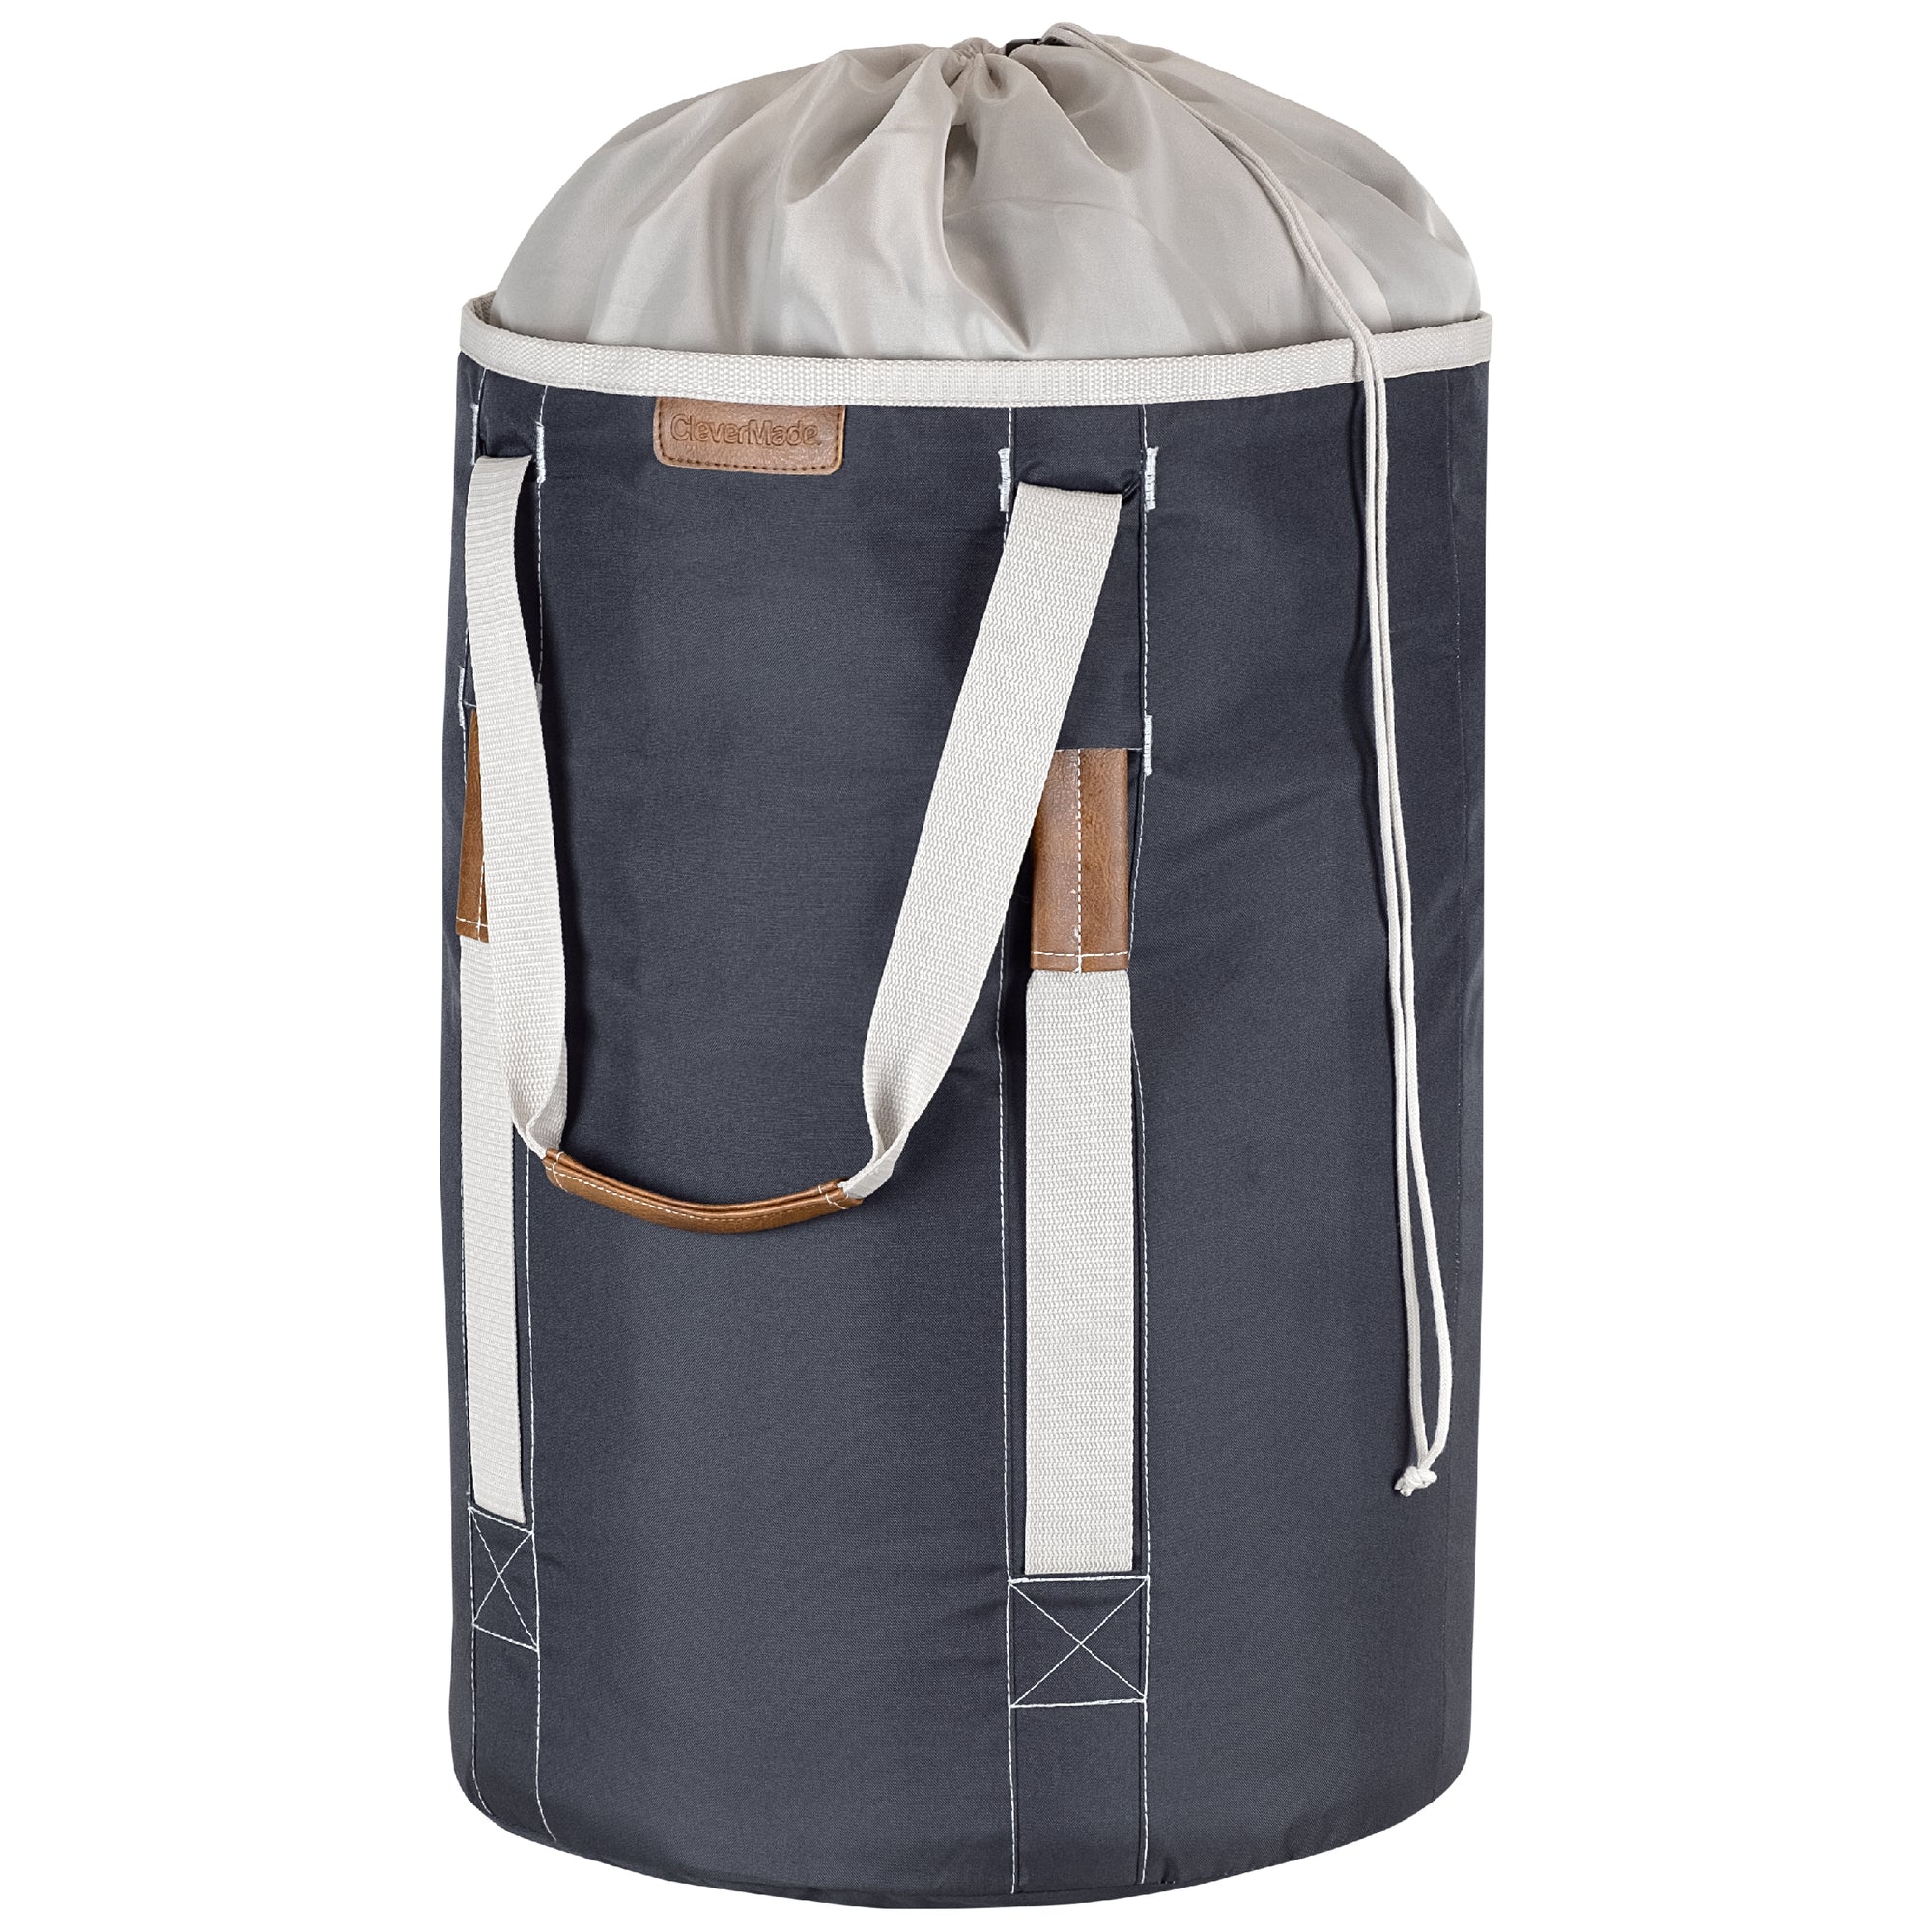 CleverMade Backpack Laundry Duffle Bag